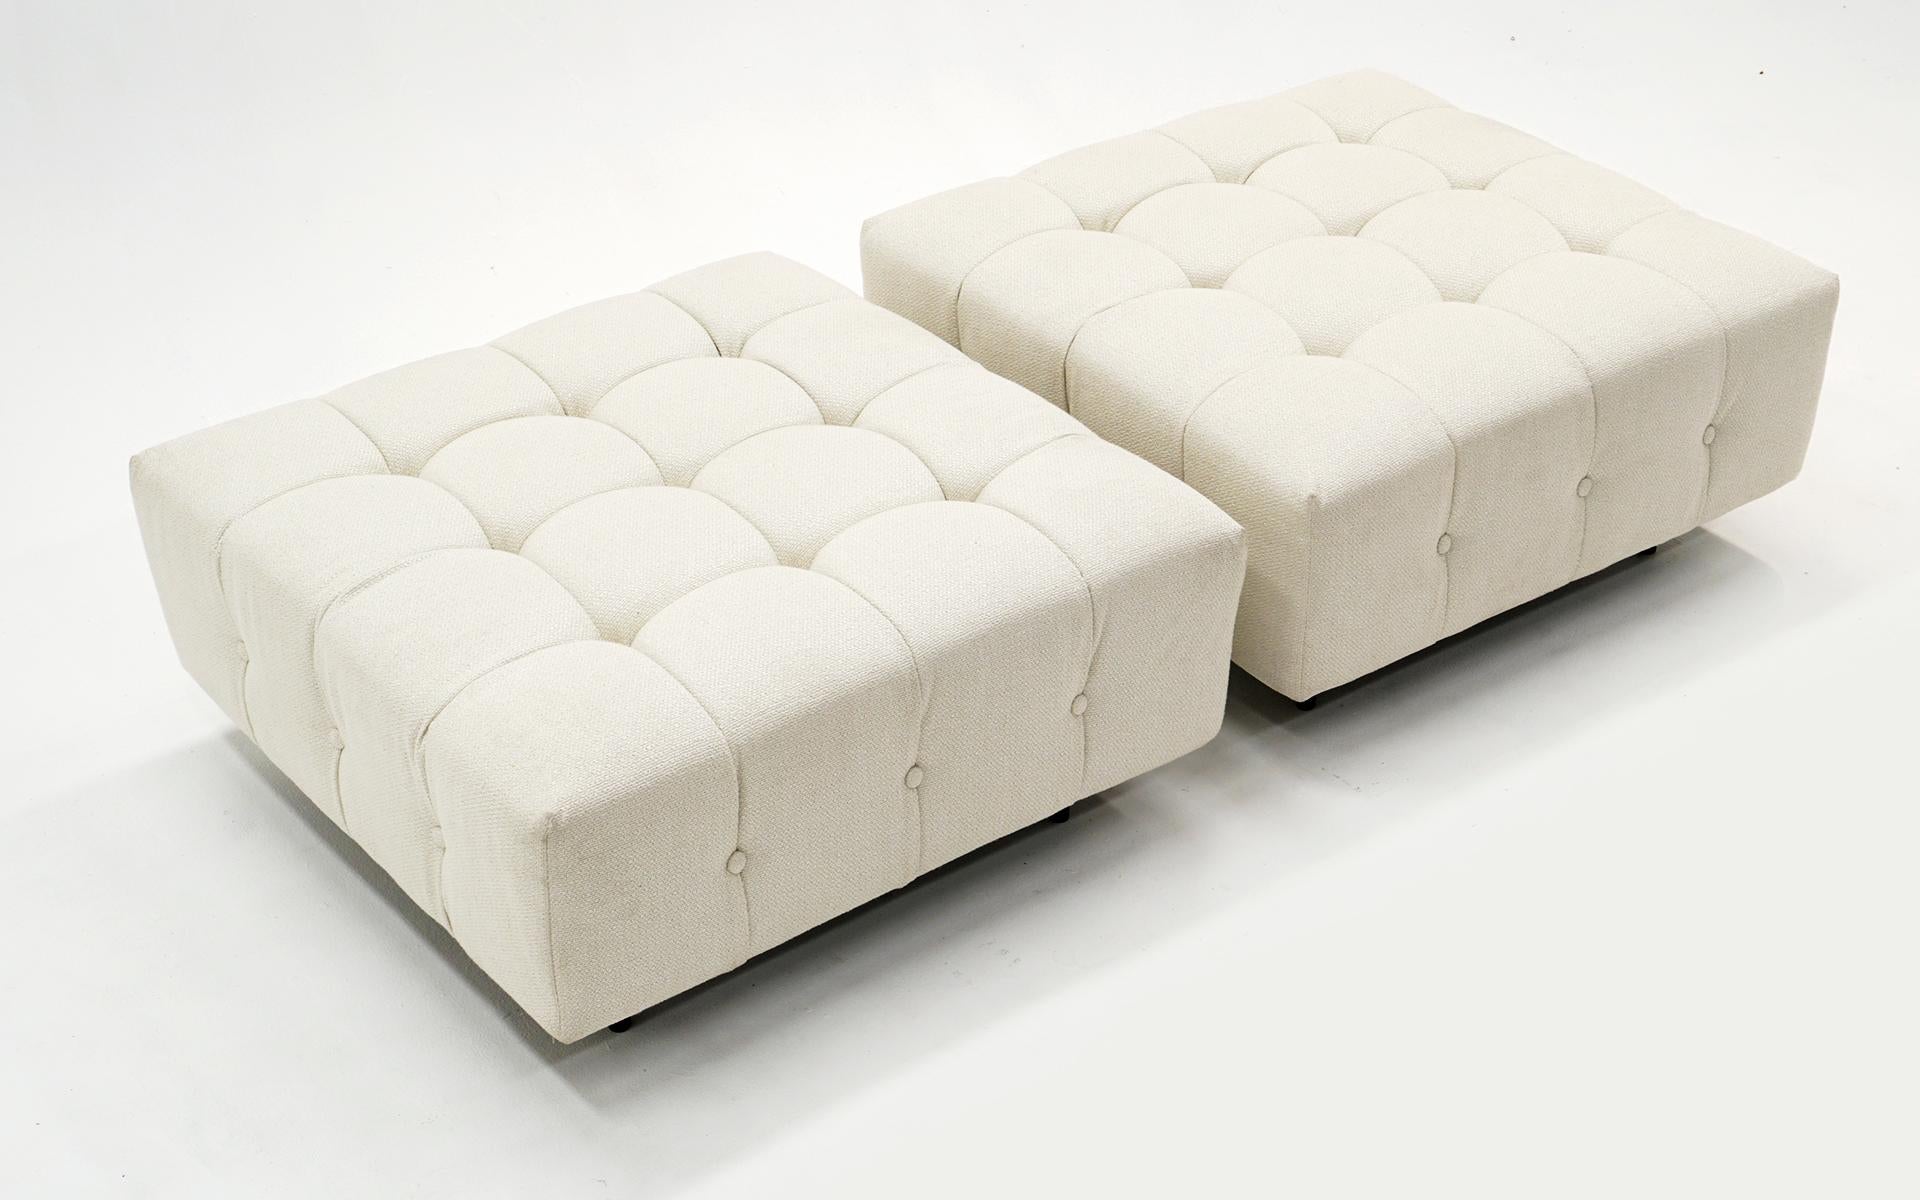 Two matching Harvey Probber ottomans expertly reupholstered in a white / ivory soft blended fabric. The metal black enameled legs show signs of wear and some loss to the finish, but does not detract from the overall appearance. These also function